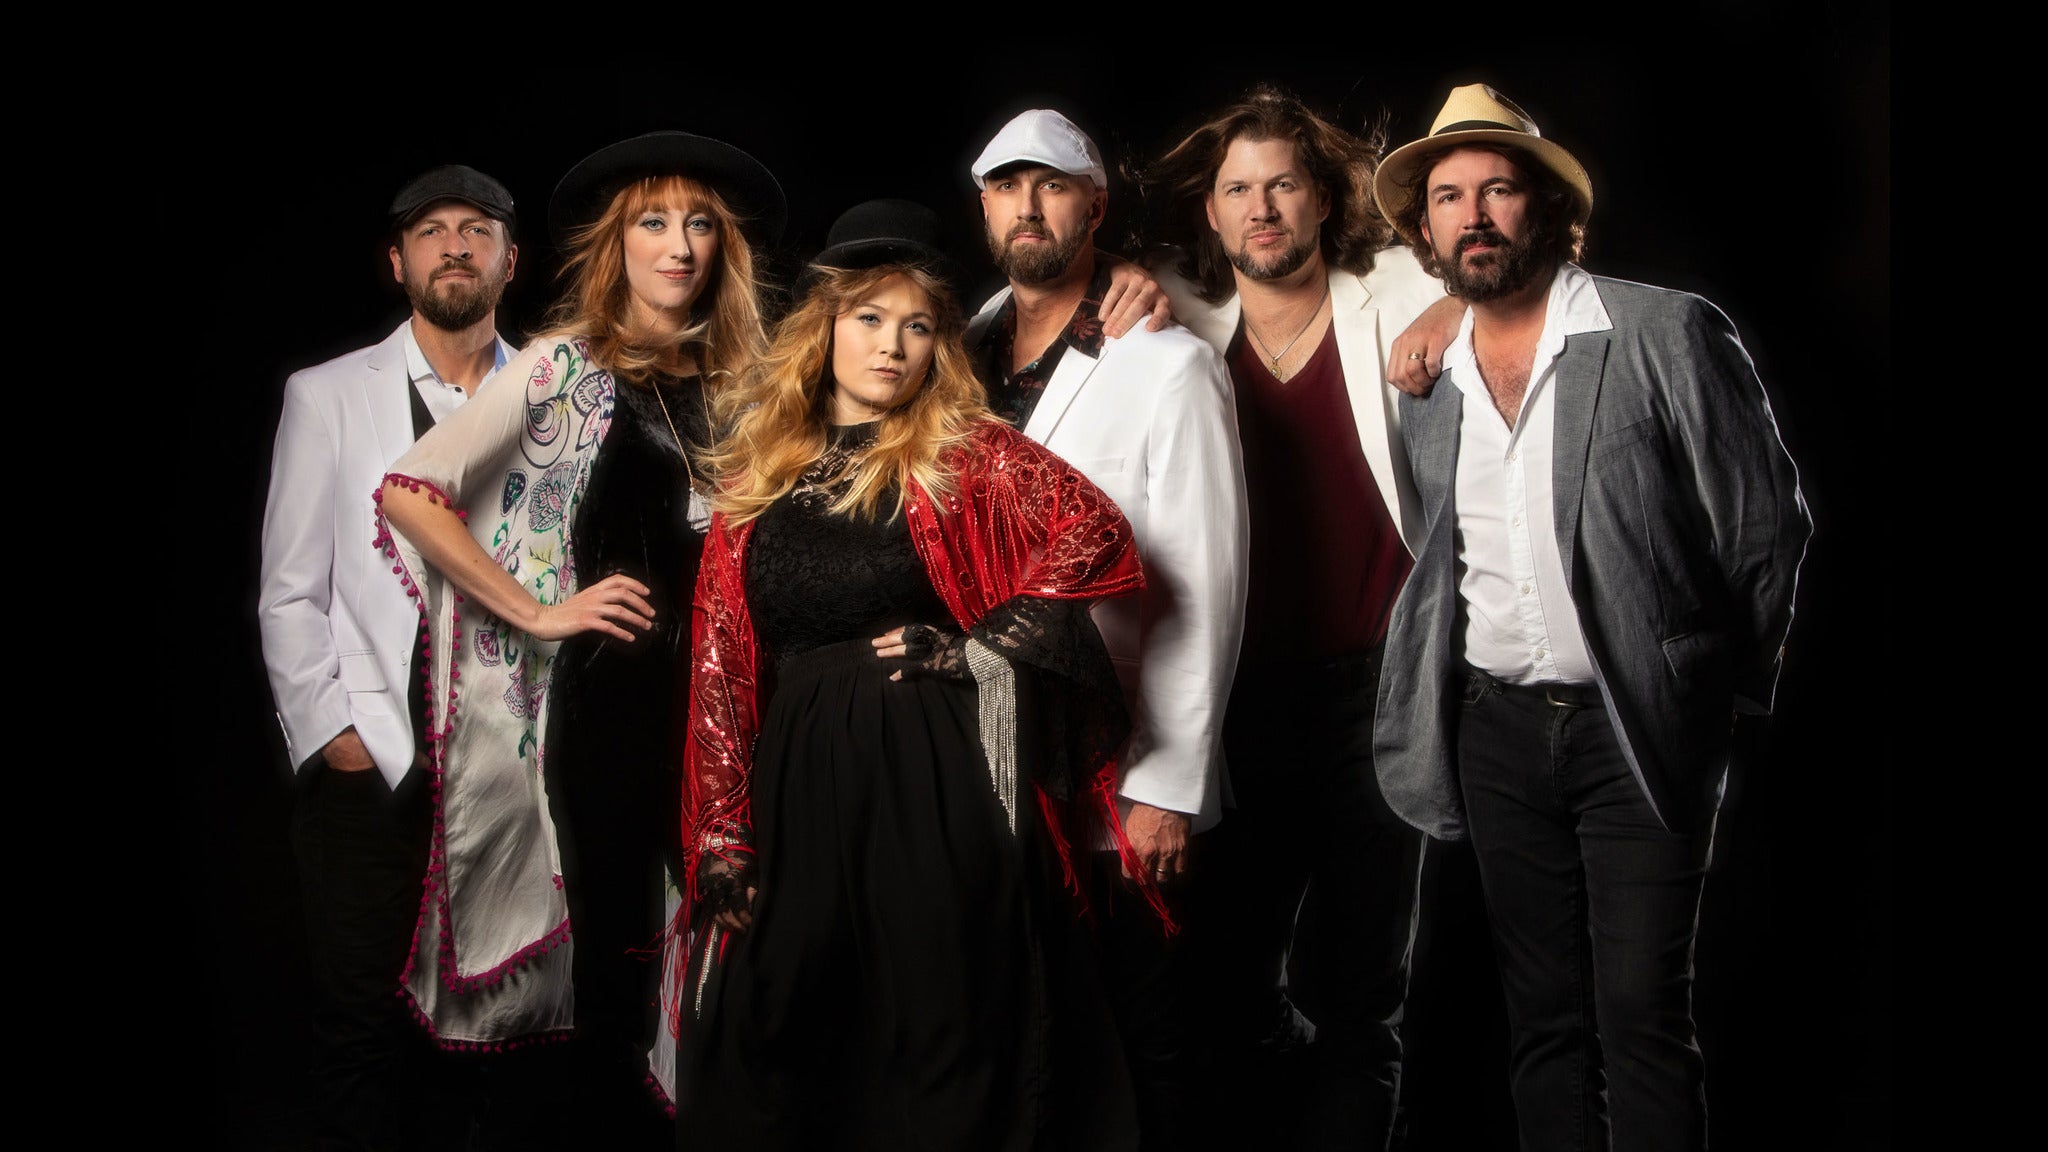 Rumours - A Tribute to Fleetwood Mac | House of Blues Myrtle Beach